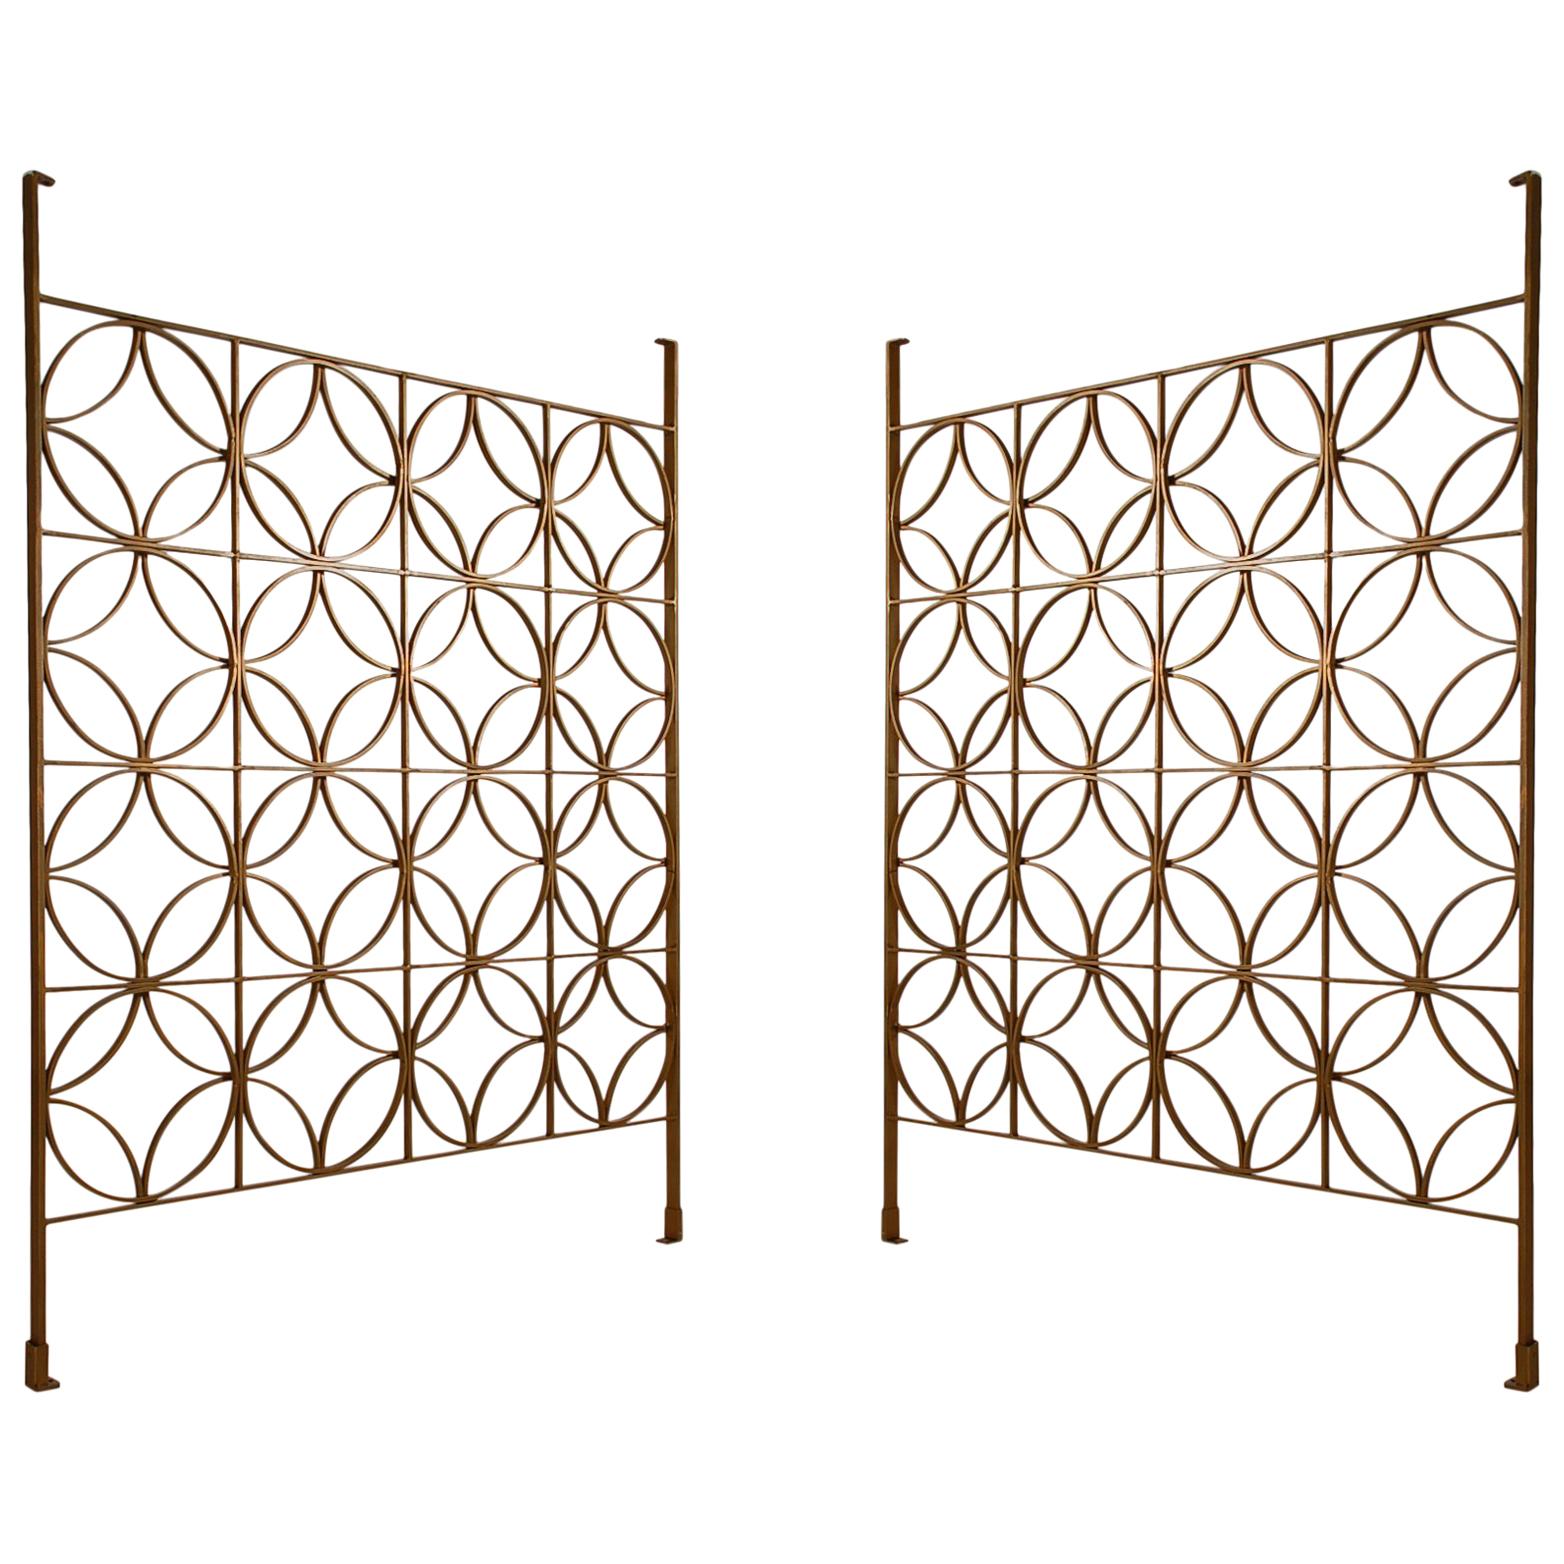 Decorative Mid-Century Modern Architectural Iron Brass Room Divider or Screen